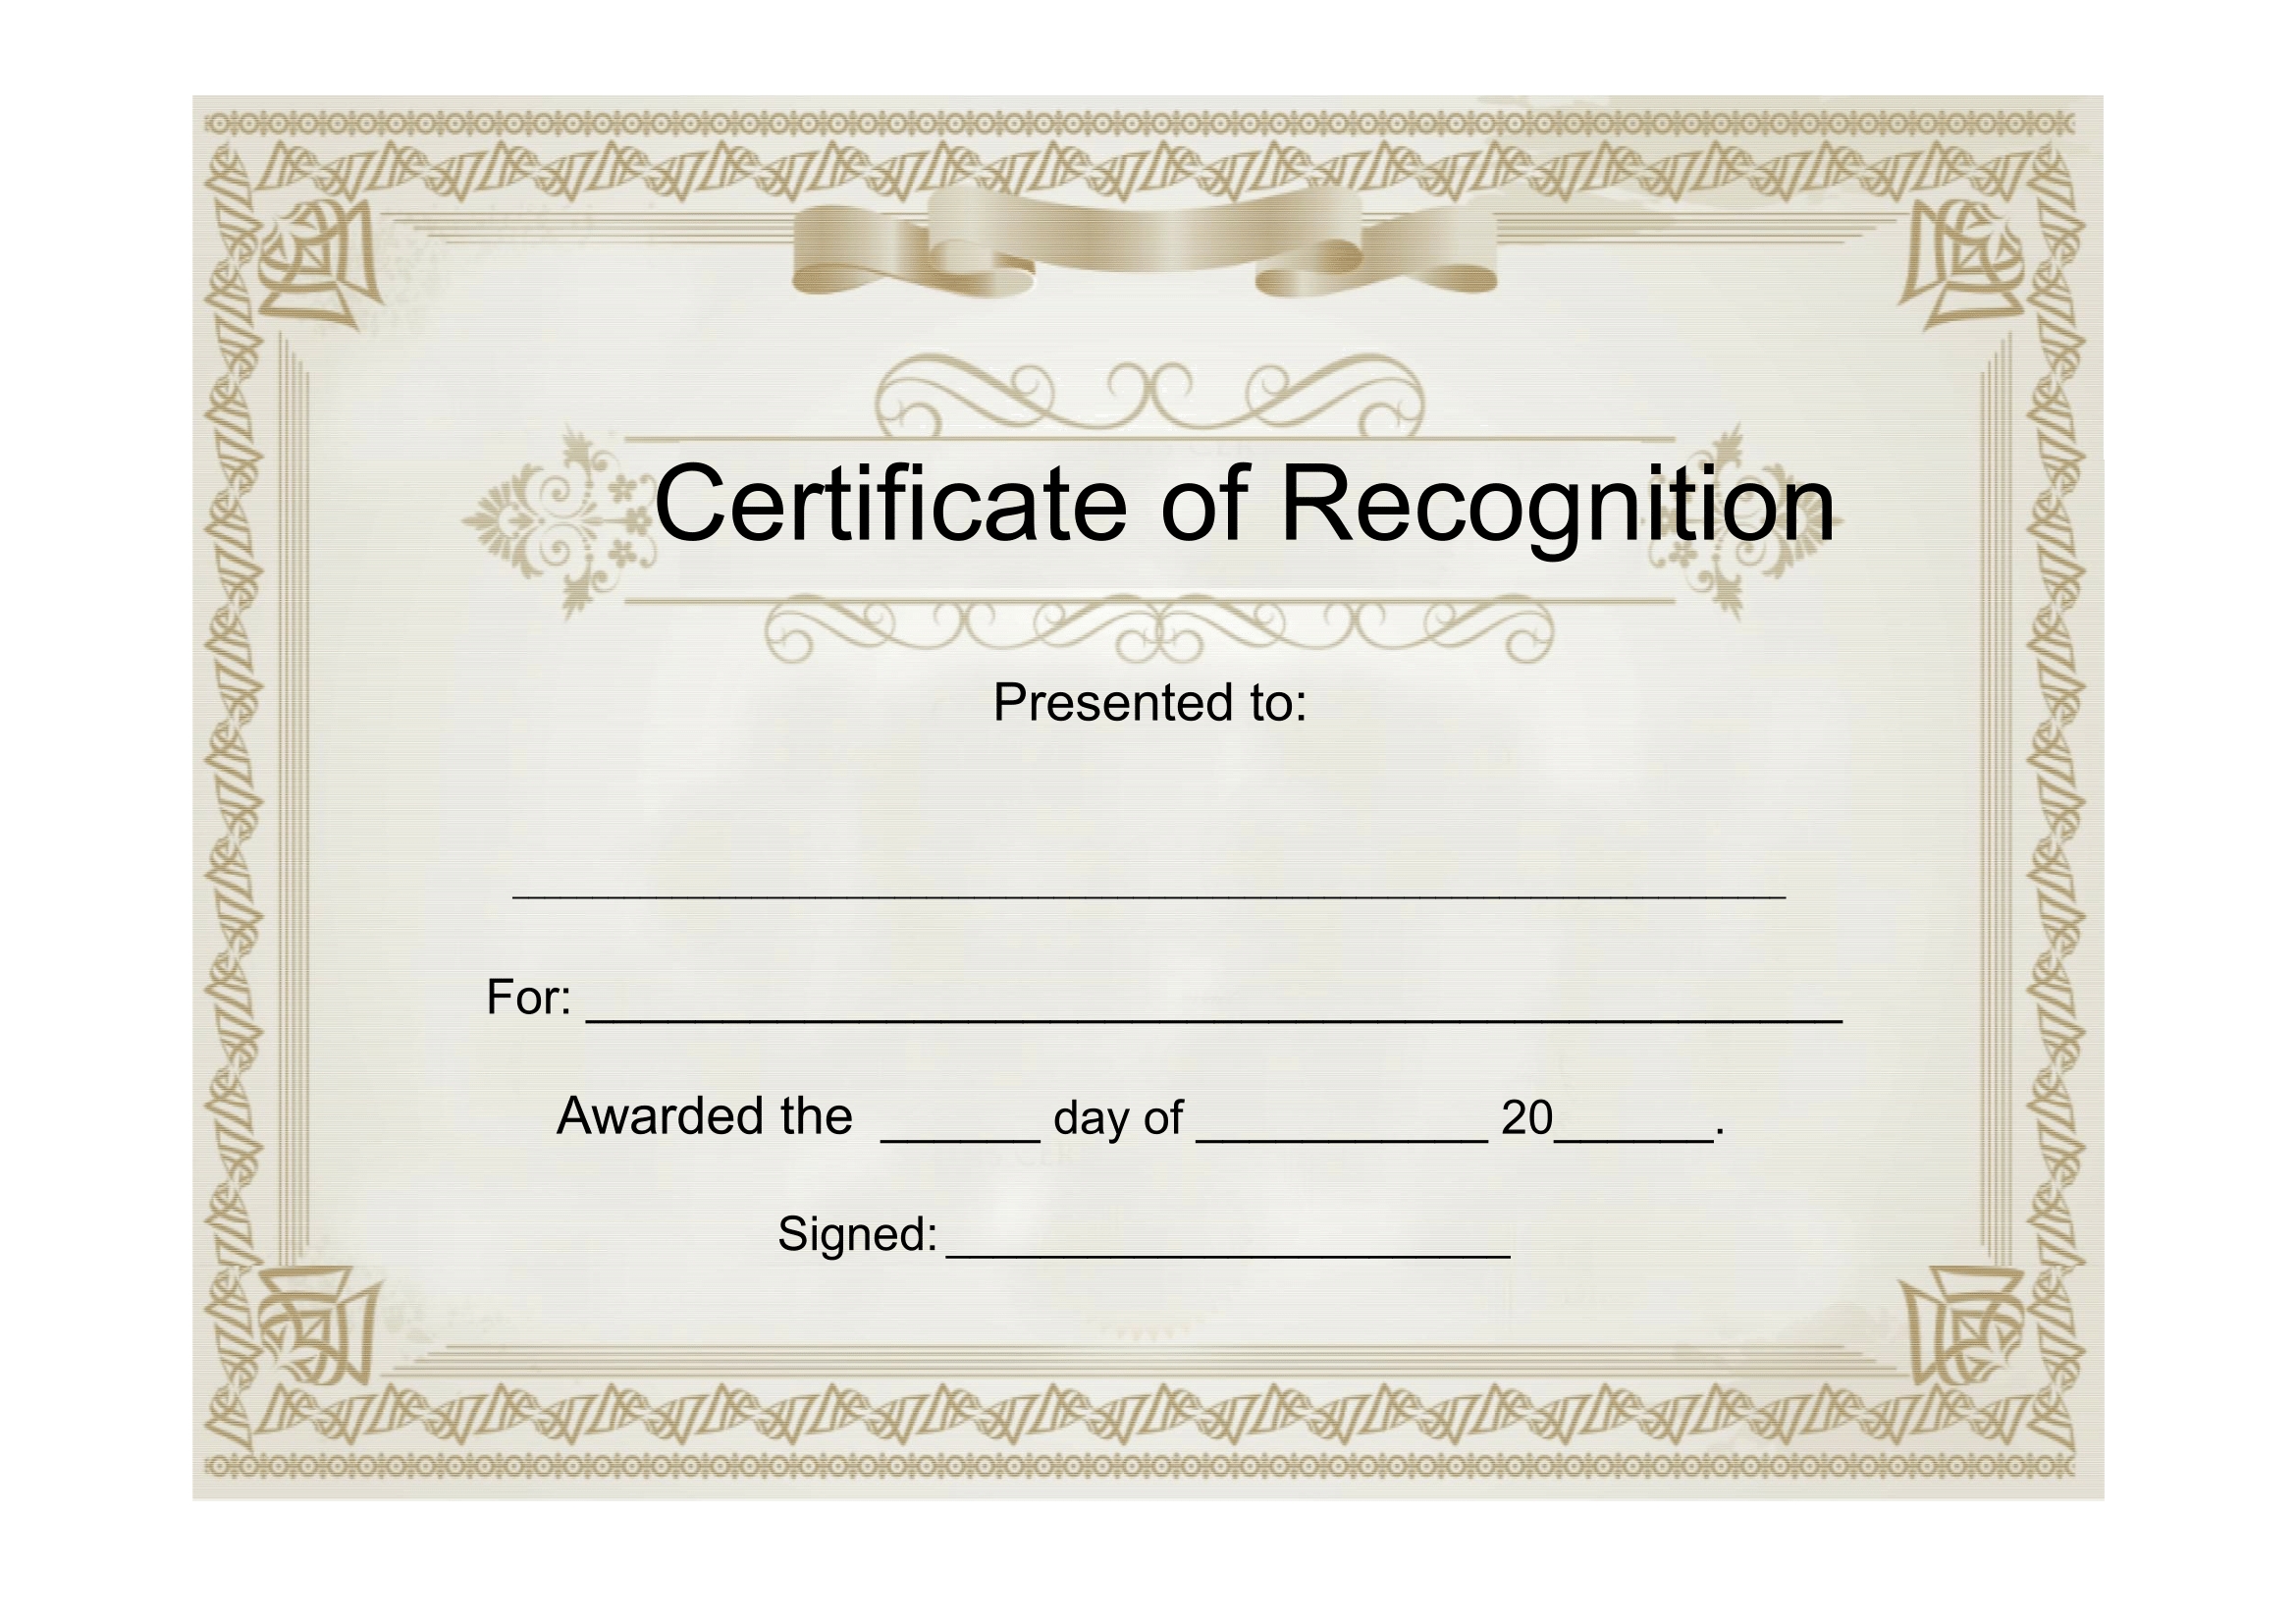 Sample Certificate Of Recognition - Free Download Template With Regard To Template For Recognition Certificate